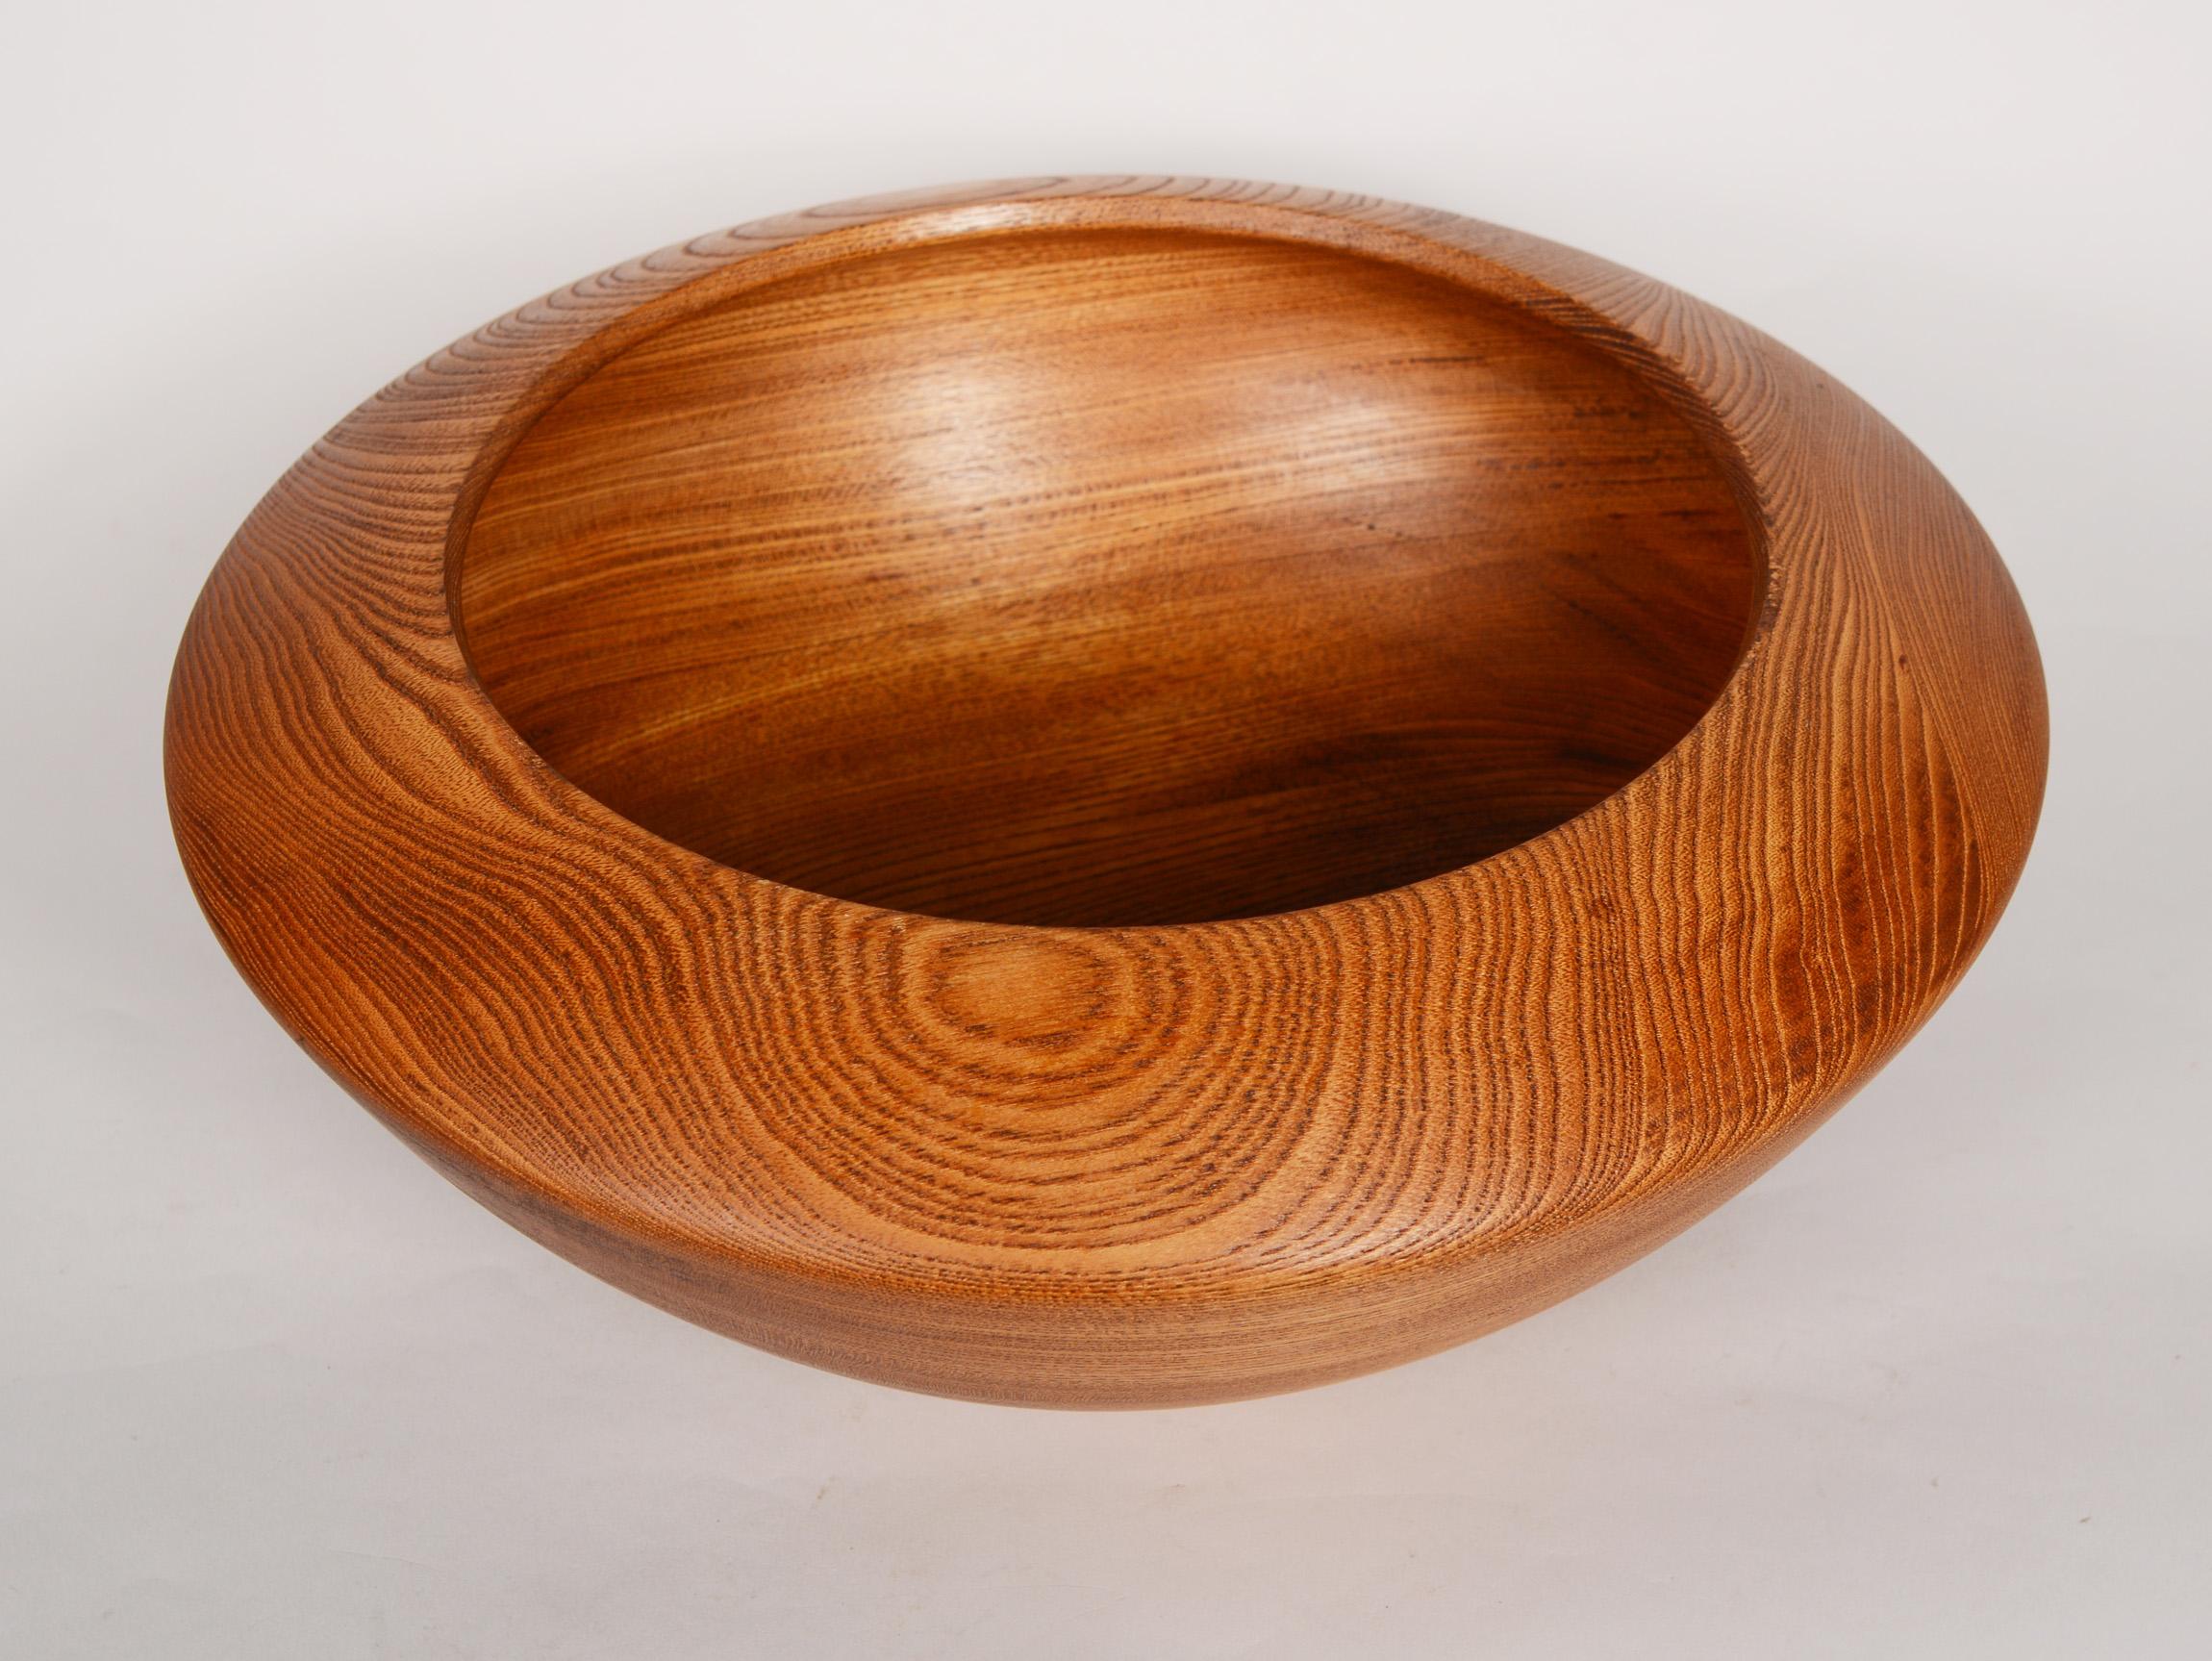 Large salad or decorative bowl made by Tokaido of Japan. This bowl takes great advantage of the prominent grain of keyaki wood.